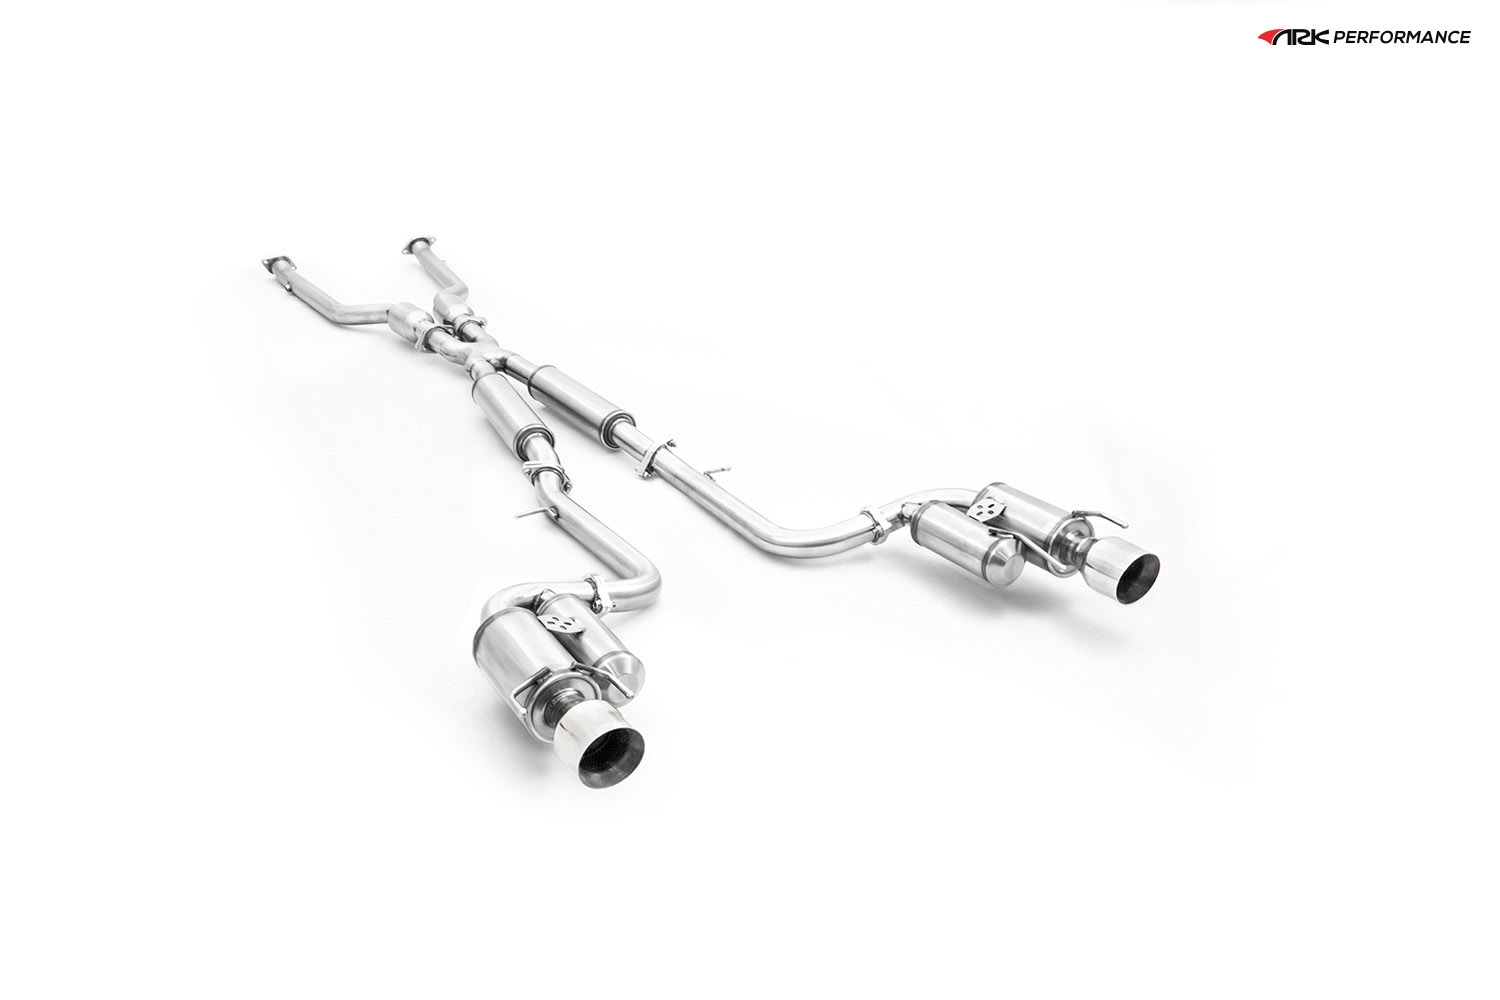 Ark Performance Stainless Steel GRiP Cat-Back Exhaust System 2.5in Pipe w/ 4.5 Polished Single Tip, Dual Exit - Lexus IS 250 / 350 RWD 14-16 2.5L V6, 3.5L V6 GSE30 / GSE31